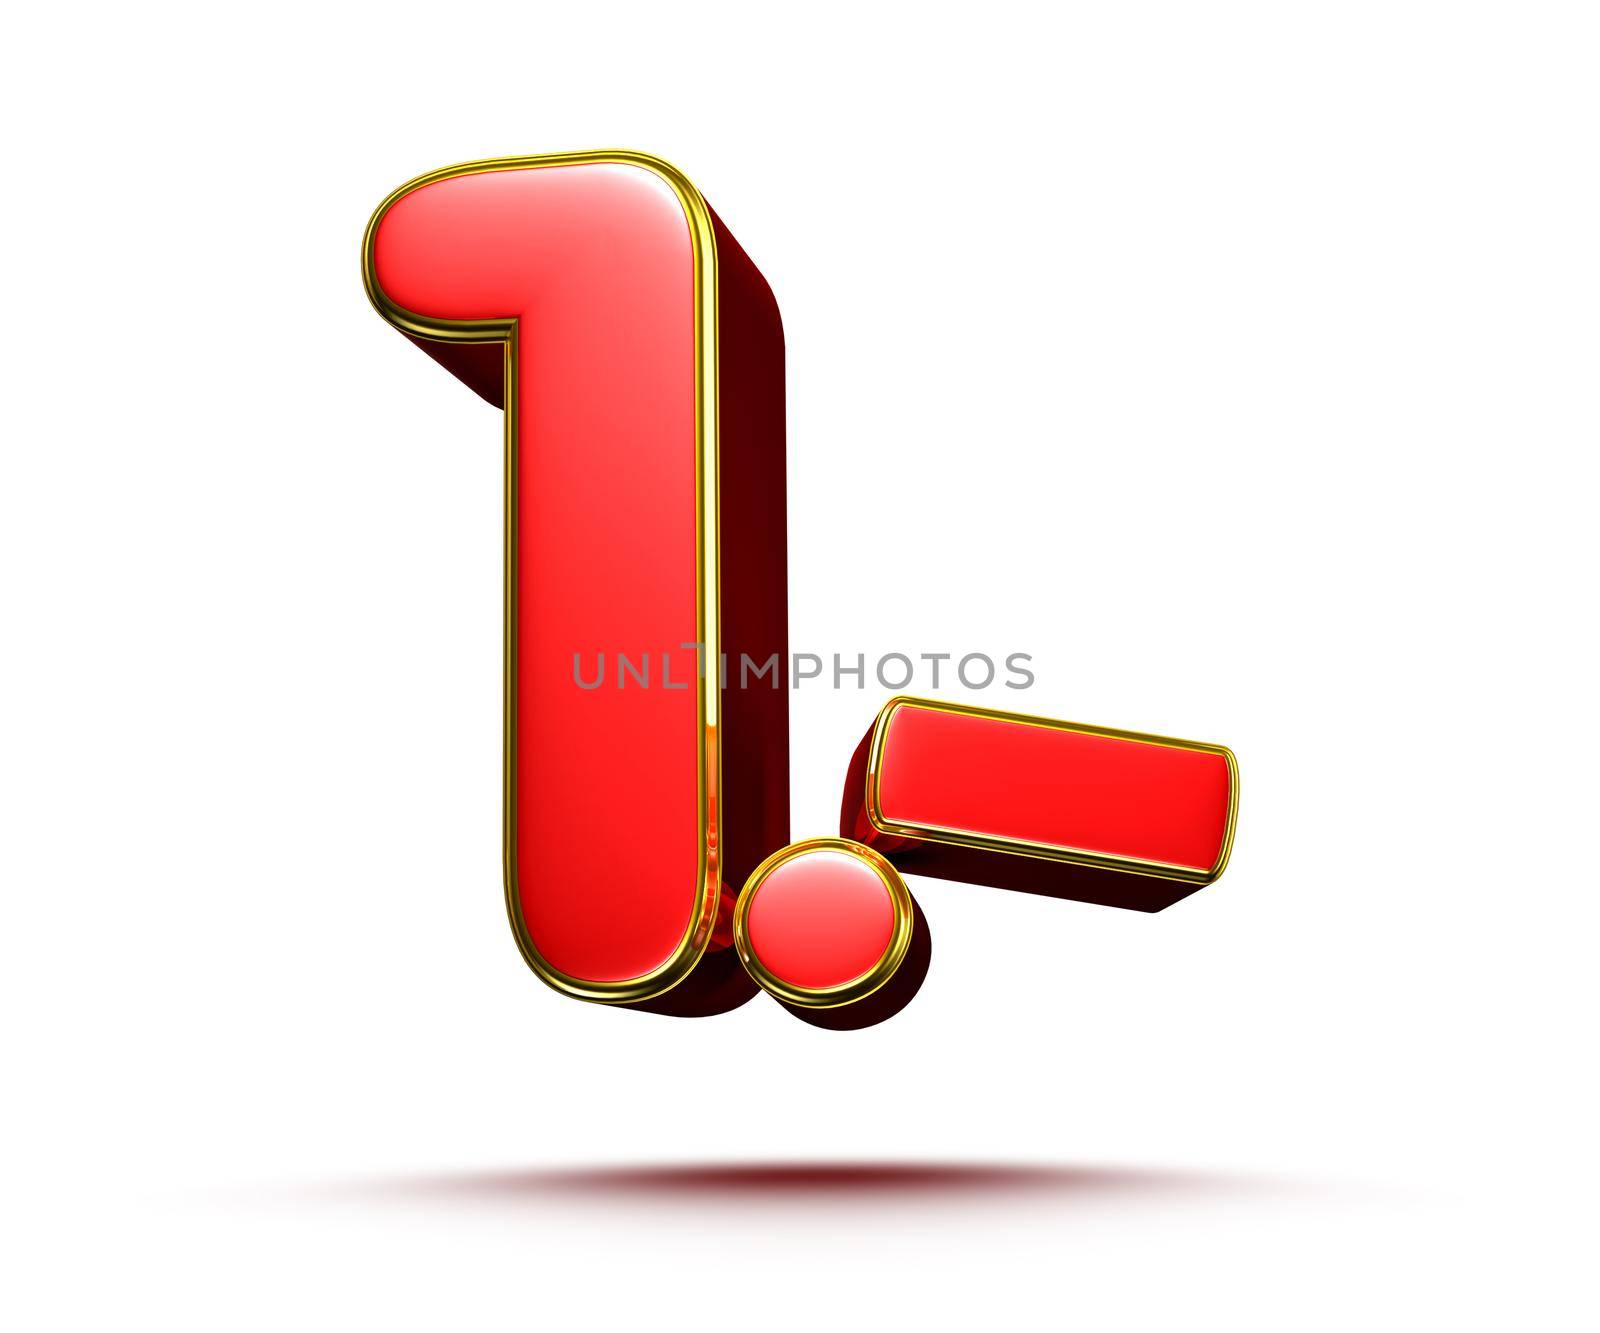 Price tag number 1 red 3D illustration with gold border on a white background with clipping path. by thitimontoyai